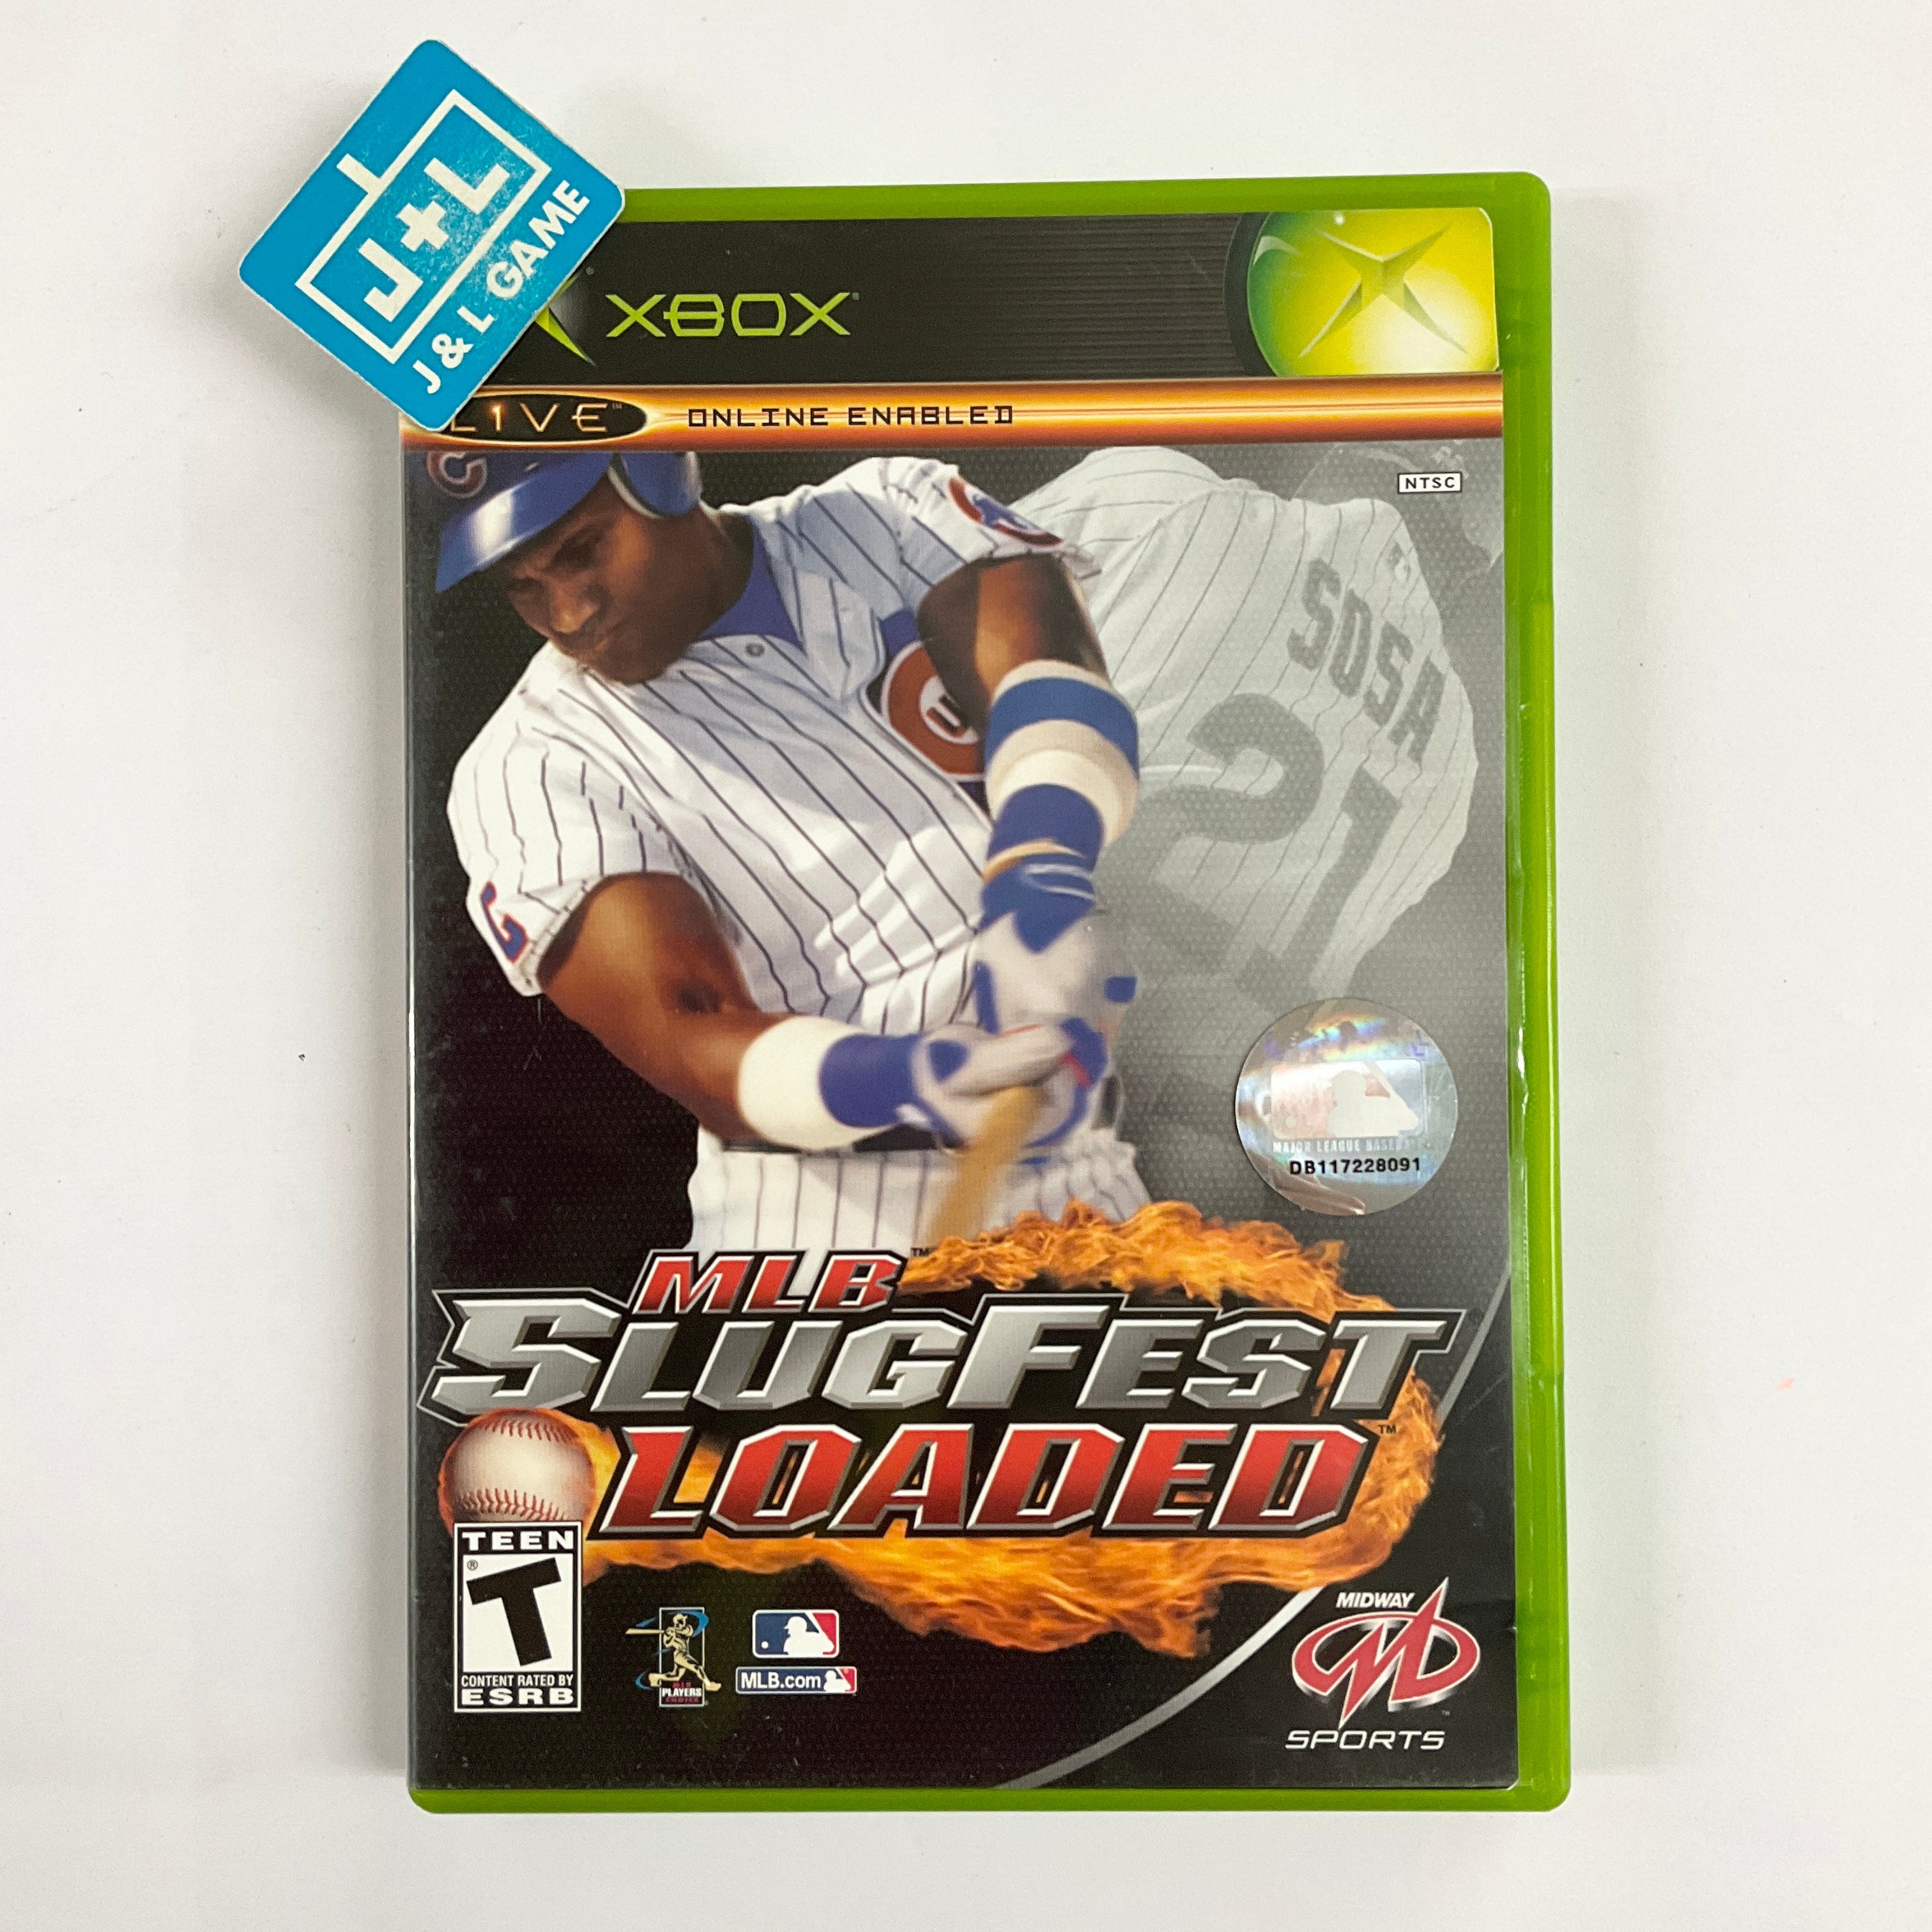 MLB SlugFest: Loaded - (XB) Xbox [Pre-Owned] Video Games Midway Sports   